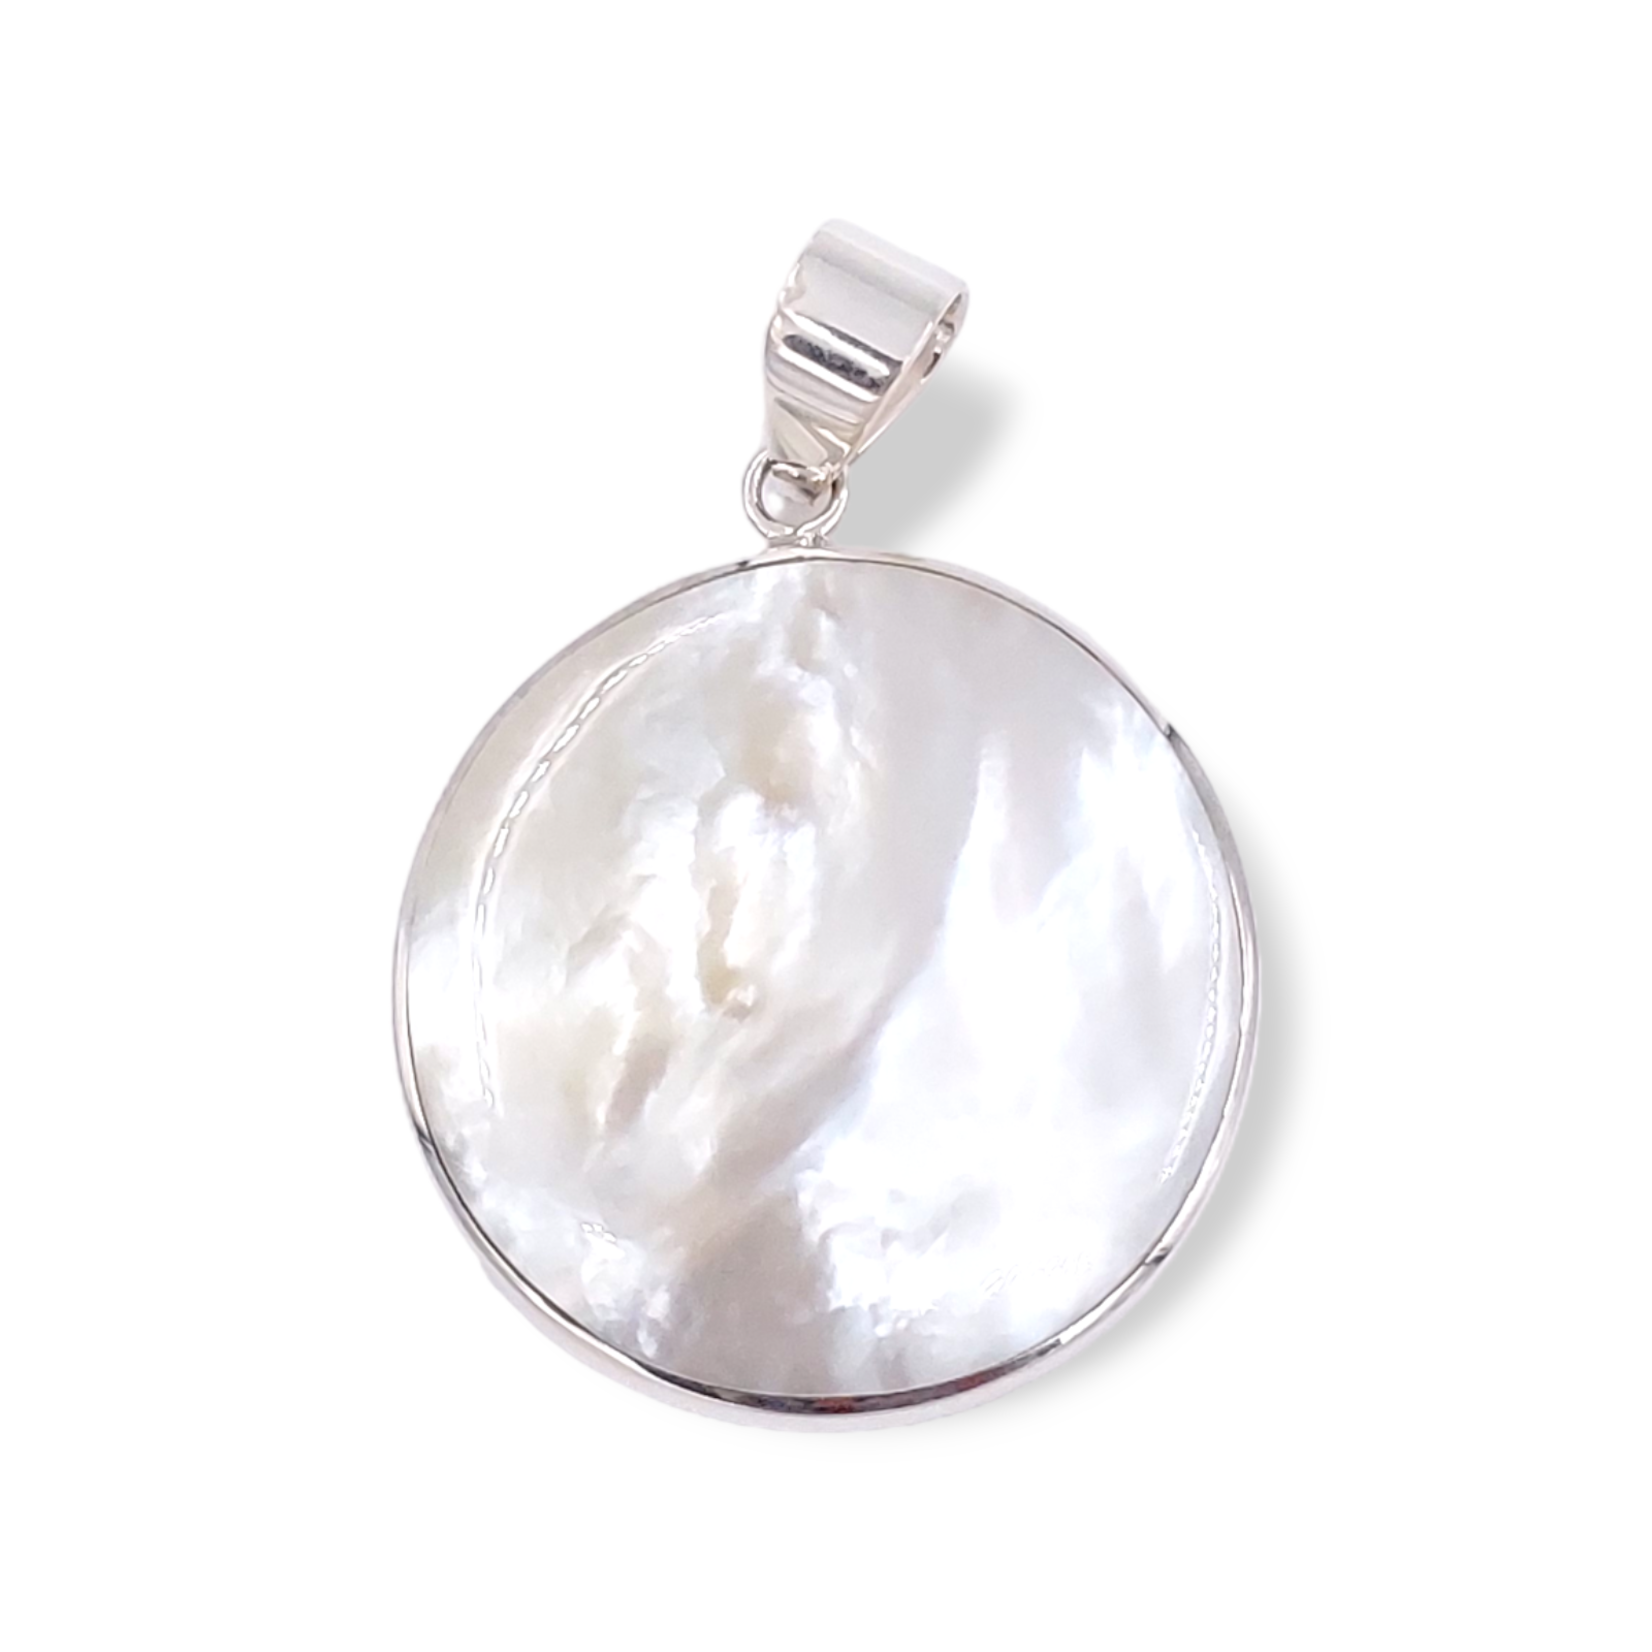 P459 Sterling Silver Reversible Paua Shell and Mother of Pearl Pendant